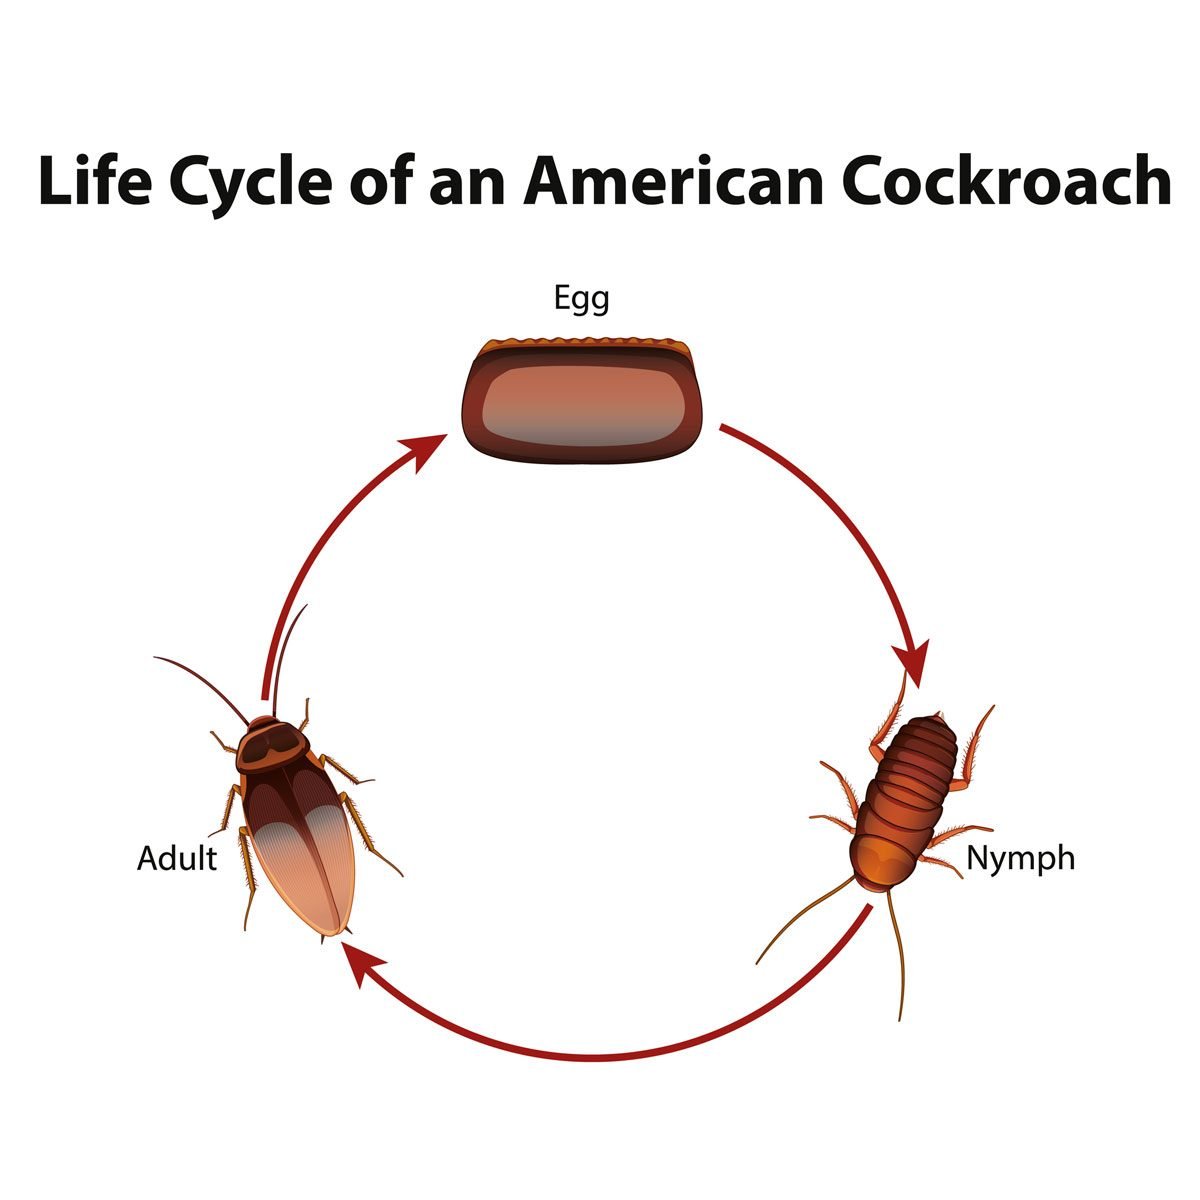 What happens in the second stage of molting in cockroaches?